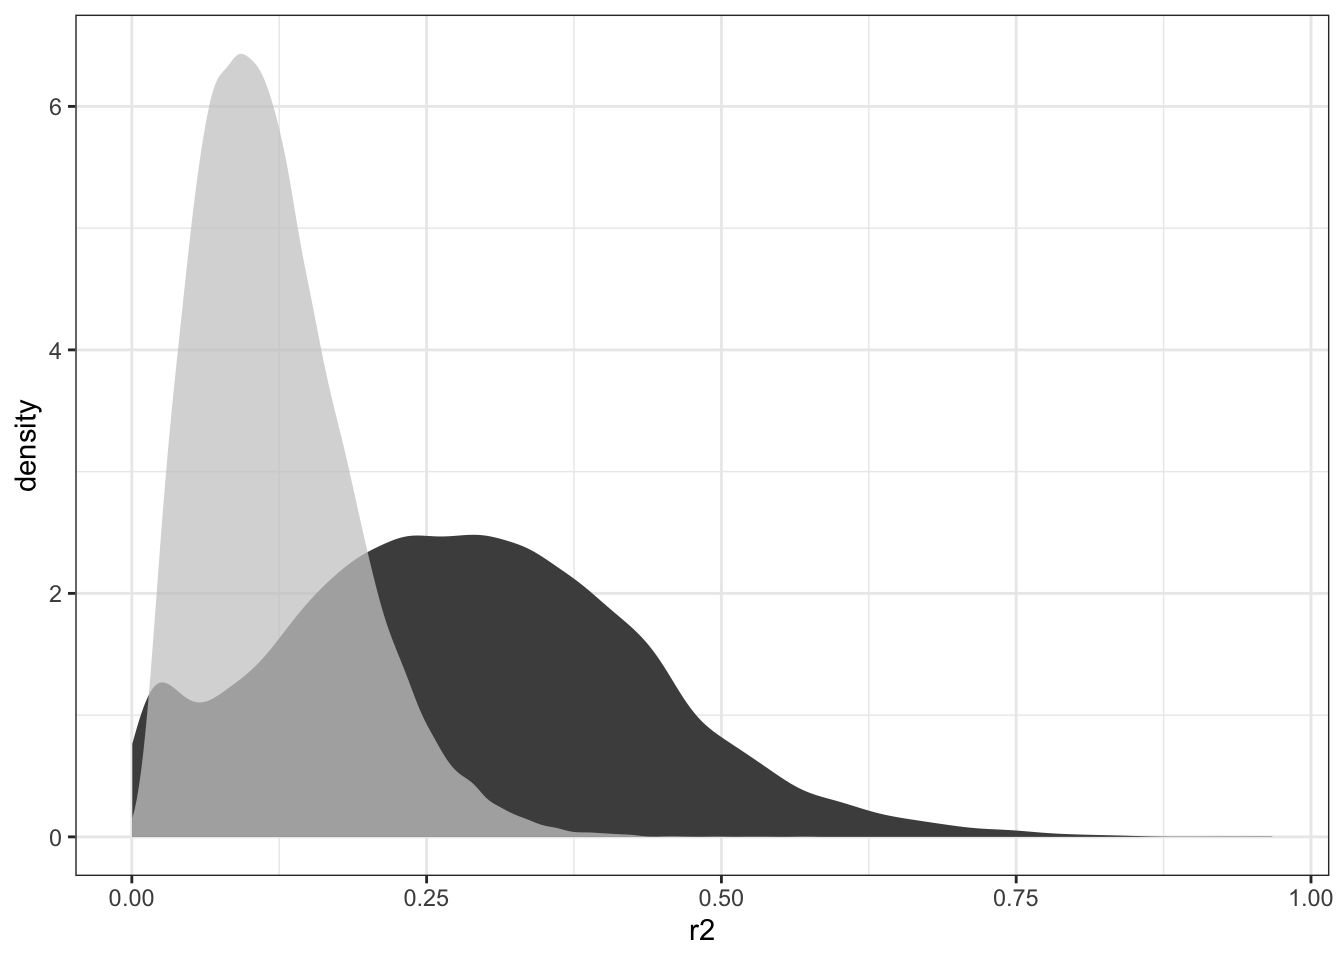 Comparing the distribution of \(R^2\) for the actual data (dark gray) to that for the null hypothesis data (light gray).